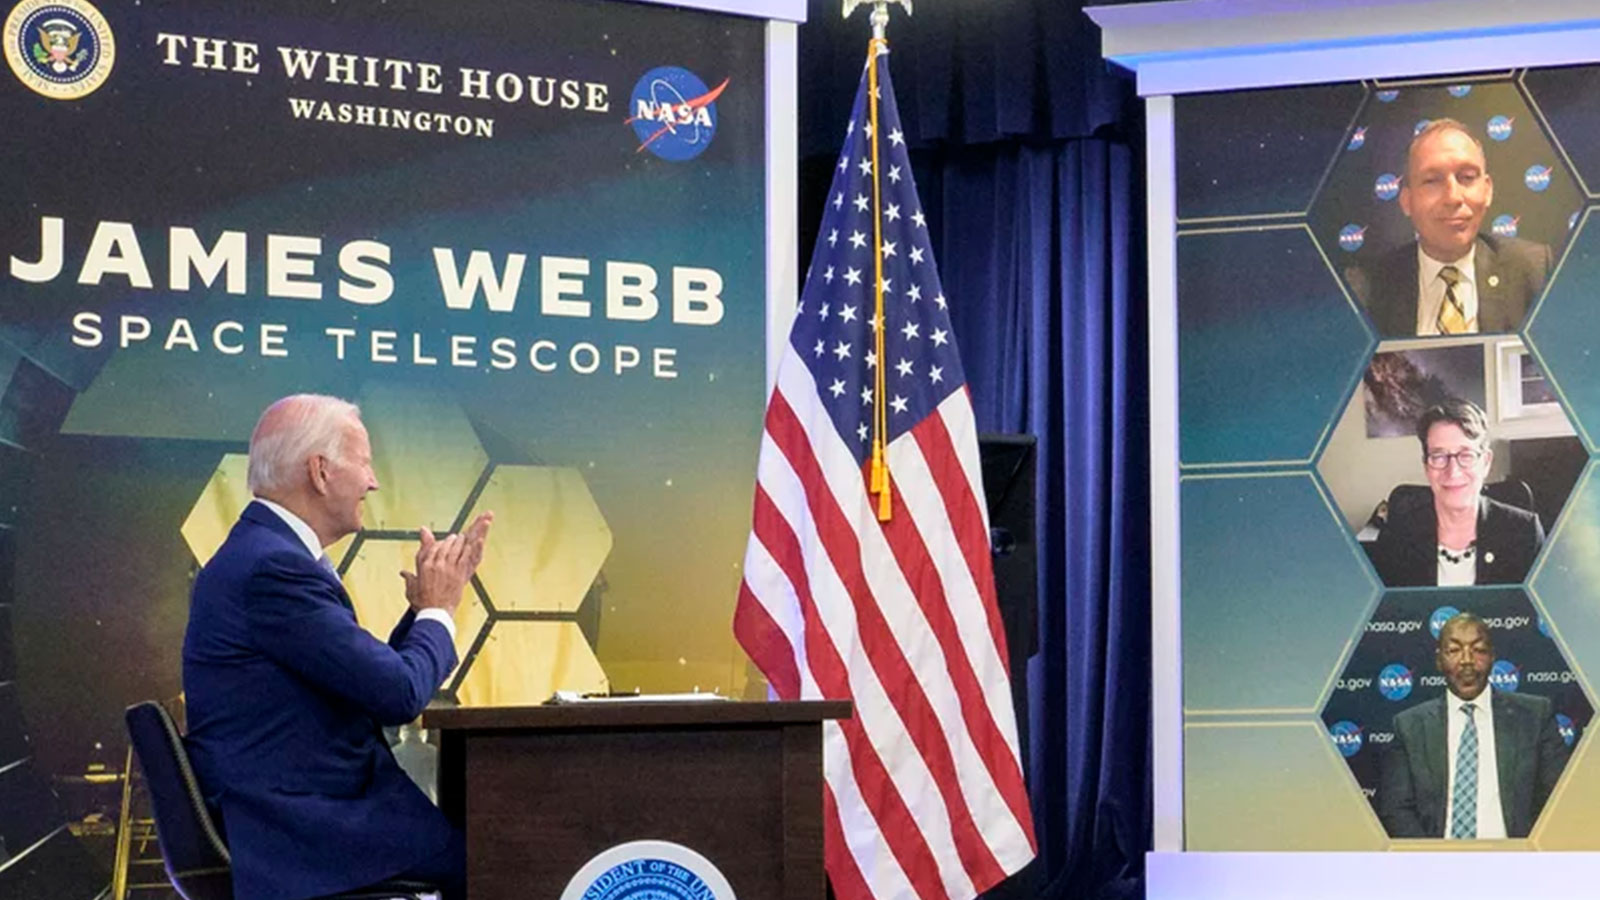 President Biden previews the first full-color image from NASA's James Webb Space Telescope from the White House on Monday, along with three NASA officials including Gregory Robinson (bottom). Bill Ingalls/NASA